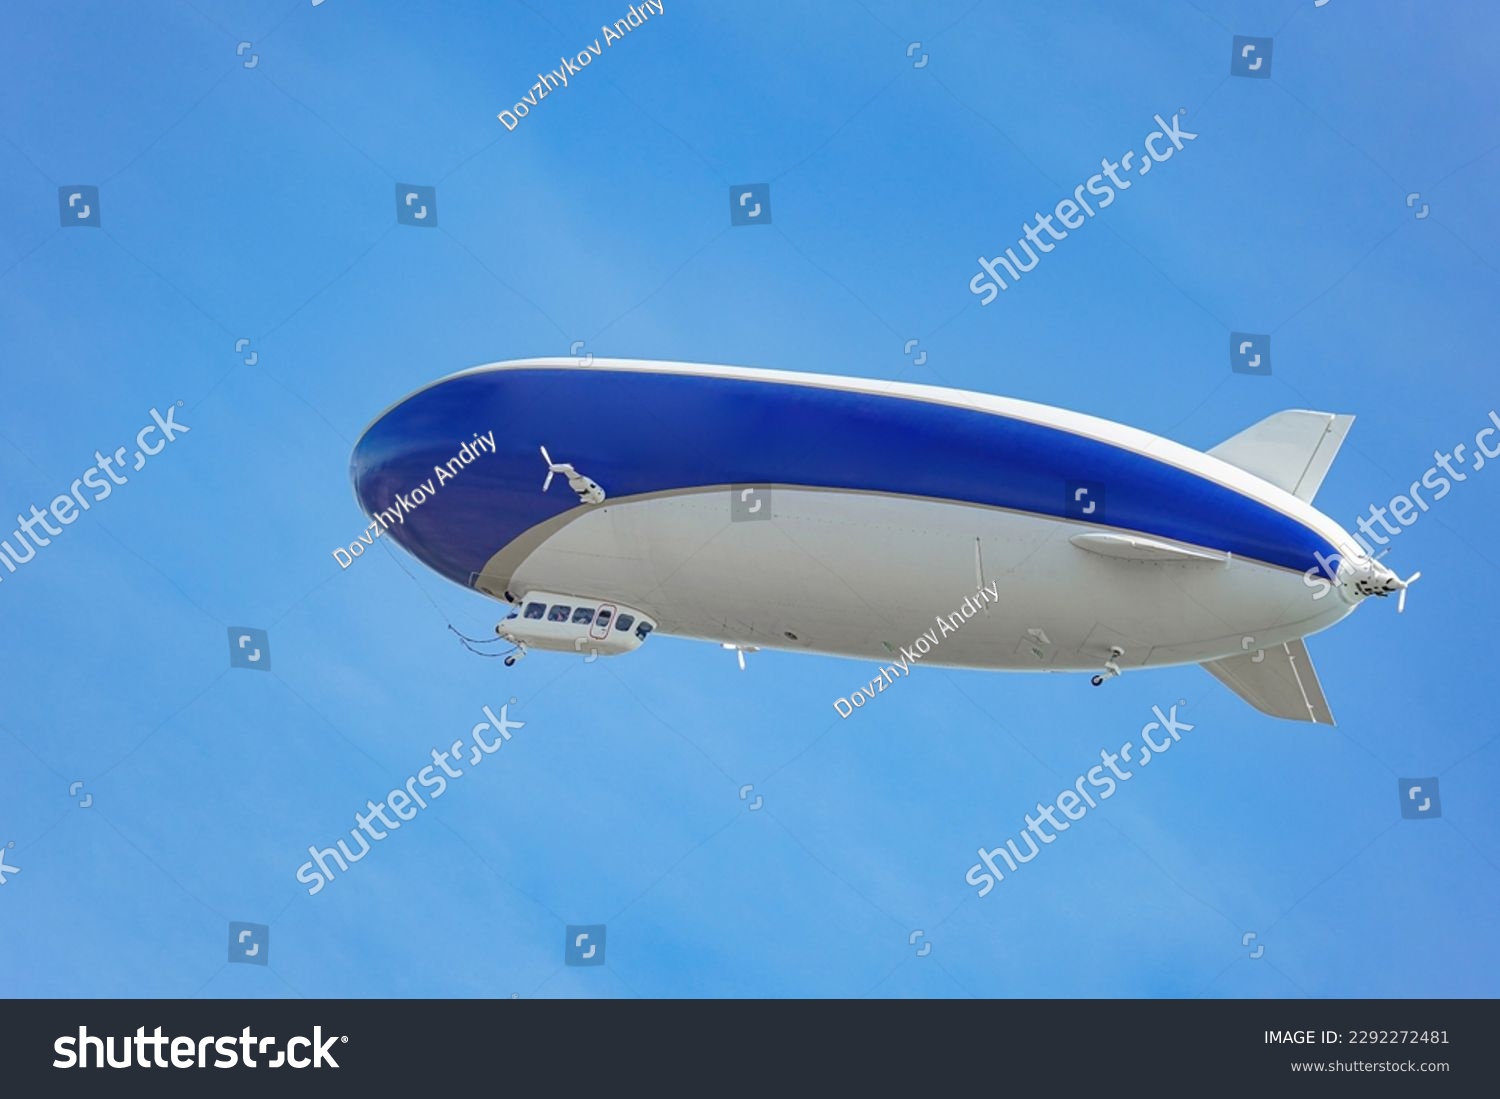 A blue and white airship with passengers on board flies against the blue sky.  #2292272481